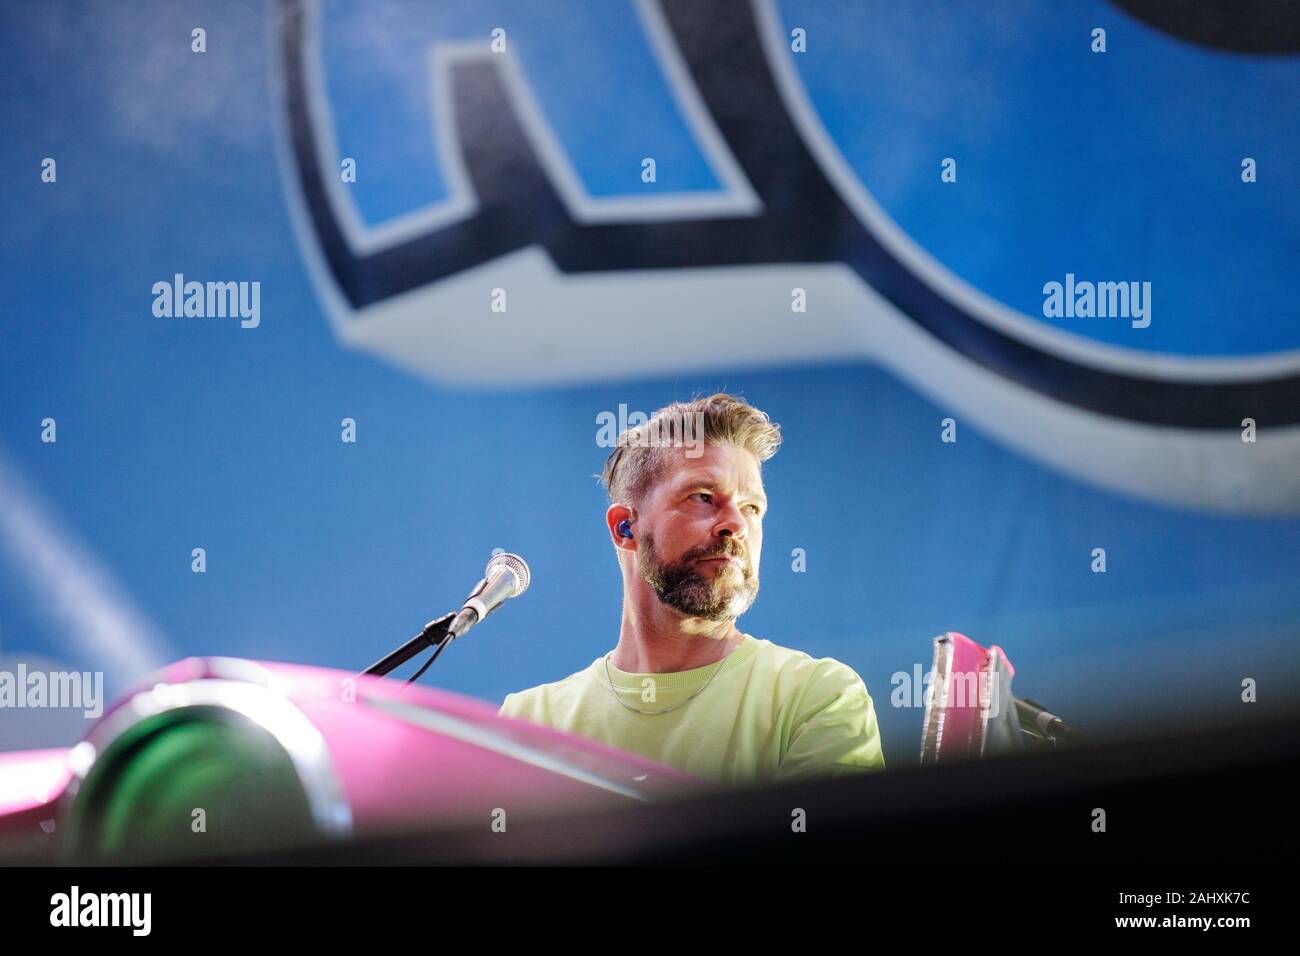 Vig, Denmark. 11th, July 2019. The Danish eurodance group Aqua performs a live concert during the Danish music festival Vig Festival 2019. Here musician Søren Rasted is seen live on stage. (Photo credit: Gonzales Photo - Martin Faelt). Stock Photo